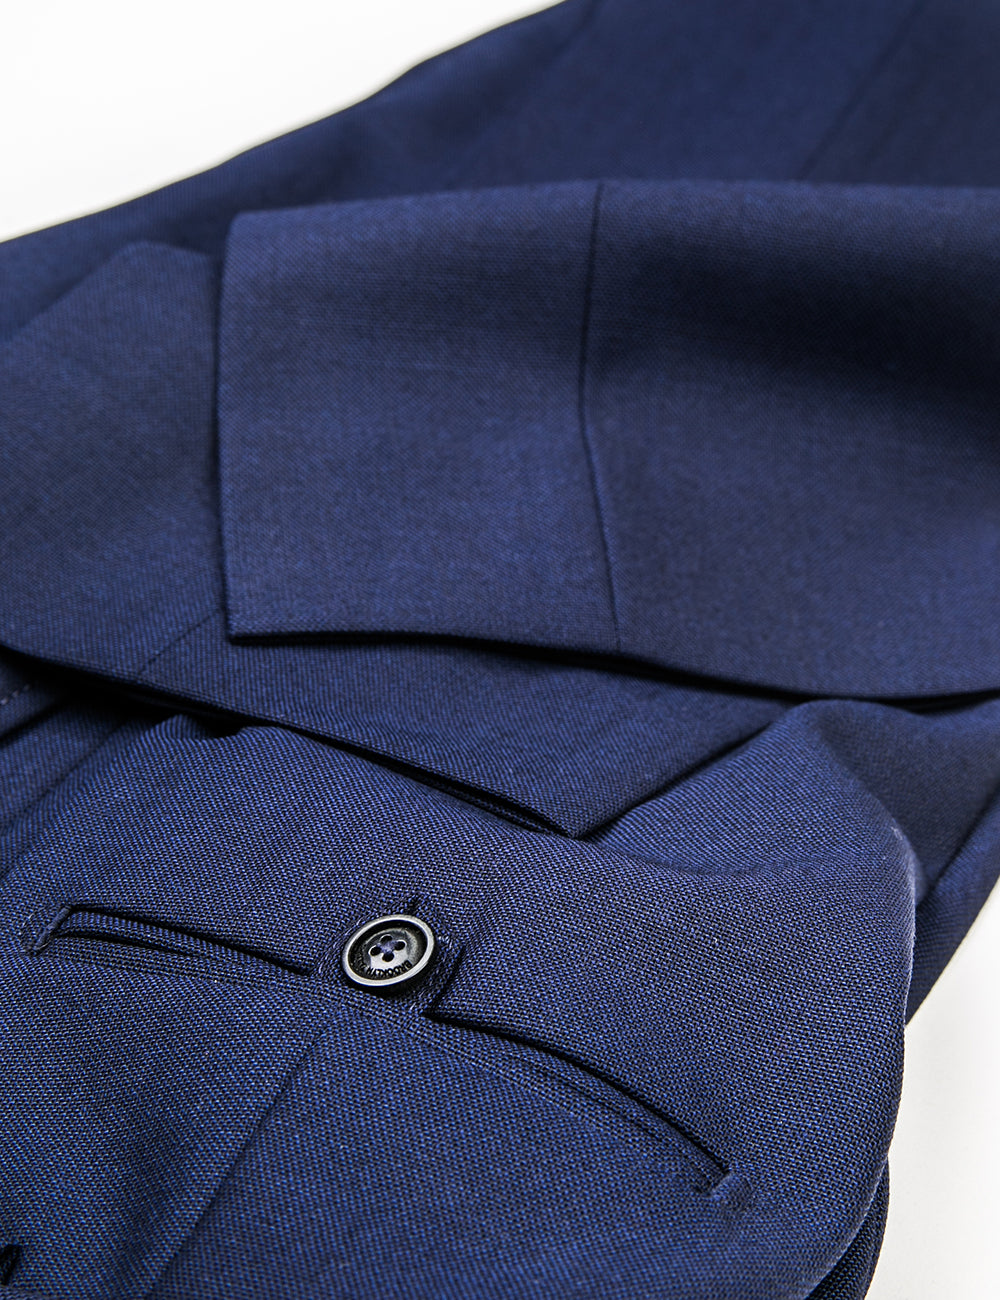 Detail shot of BKT50 Tailored Trouser in Travel-Ready Wool - Vivid Navy showing back pocket and hem